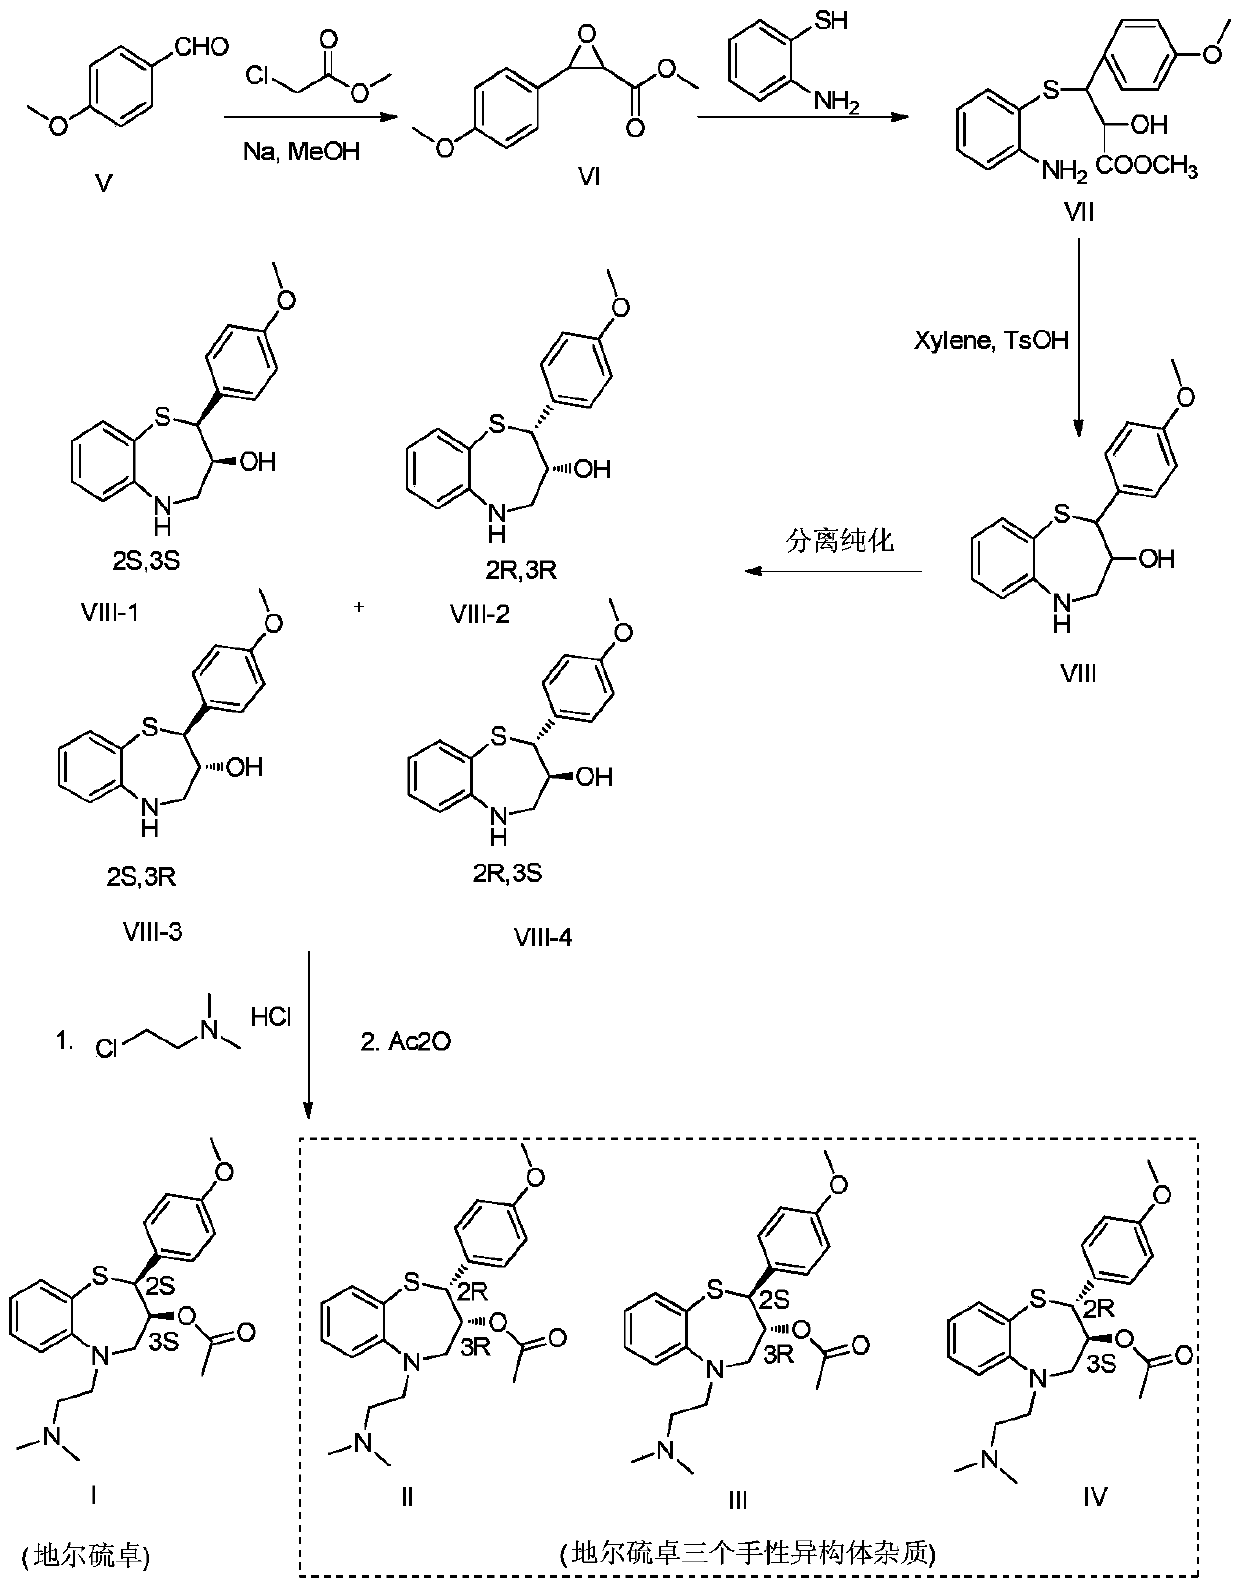 Preparation and purification method of diltiazem chiral isomer impurity